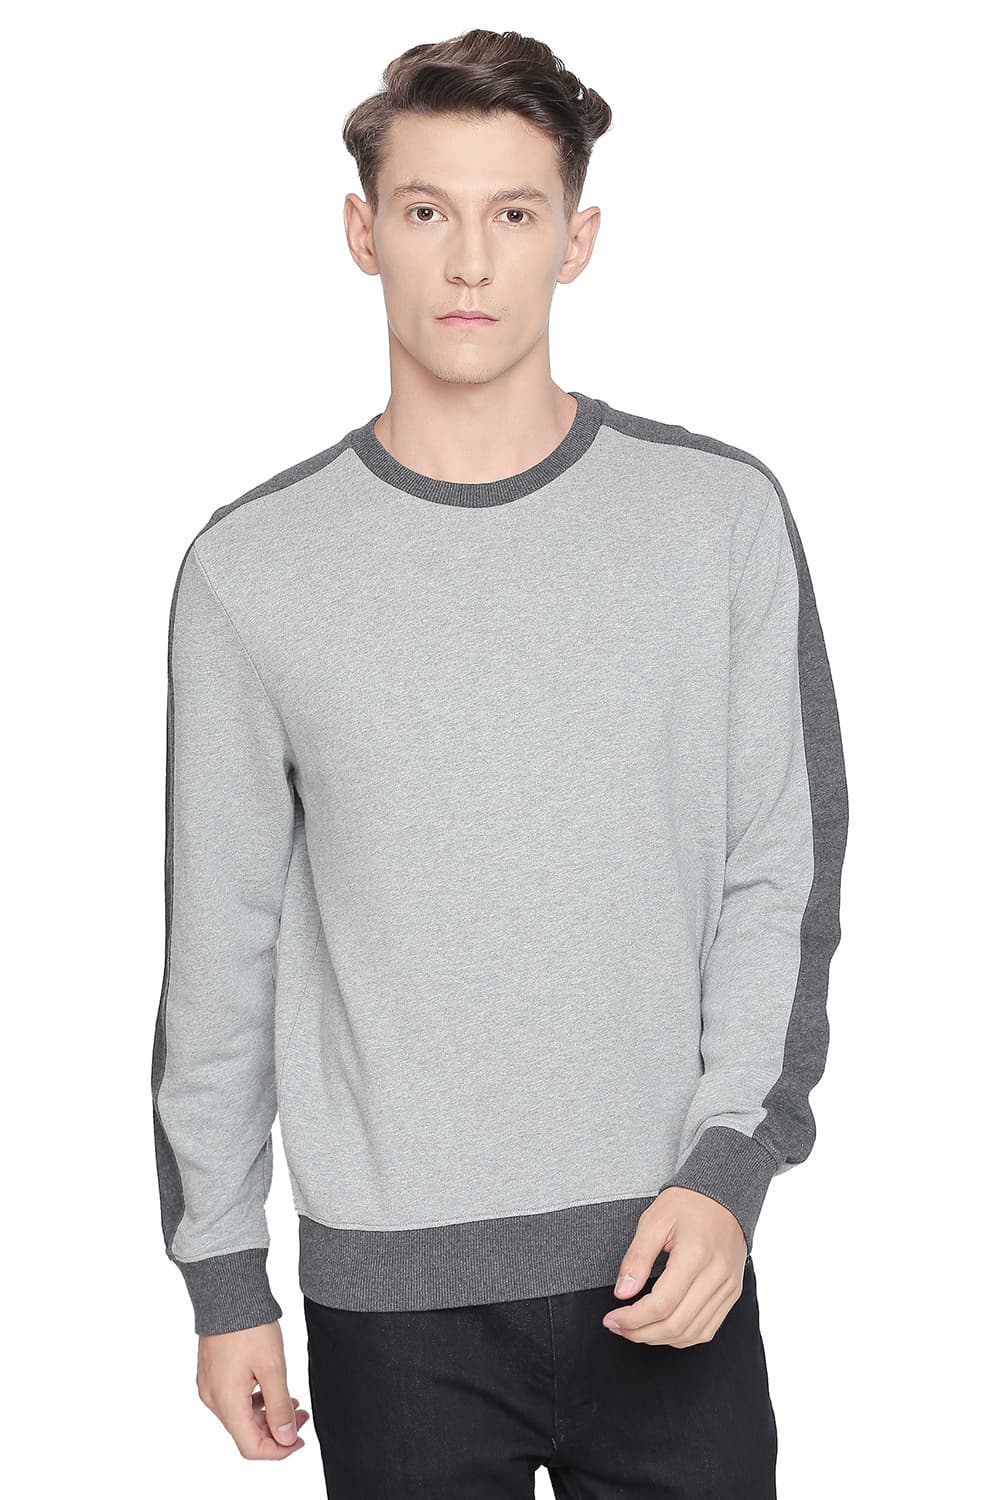 BASICS MUSCLE FIT CREW NECK PULLOVER KNIT JACKET